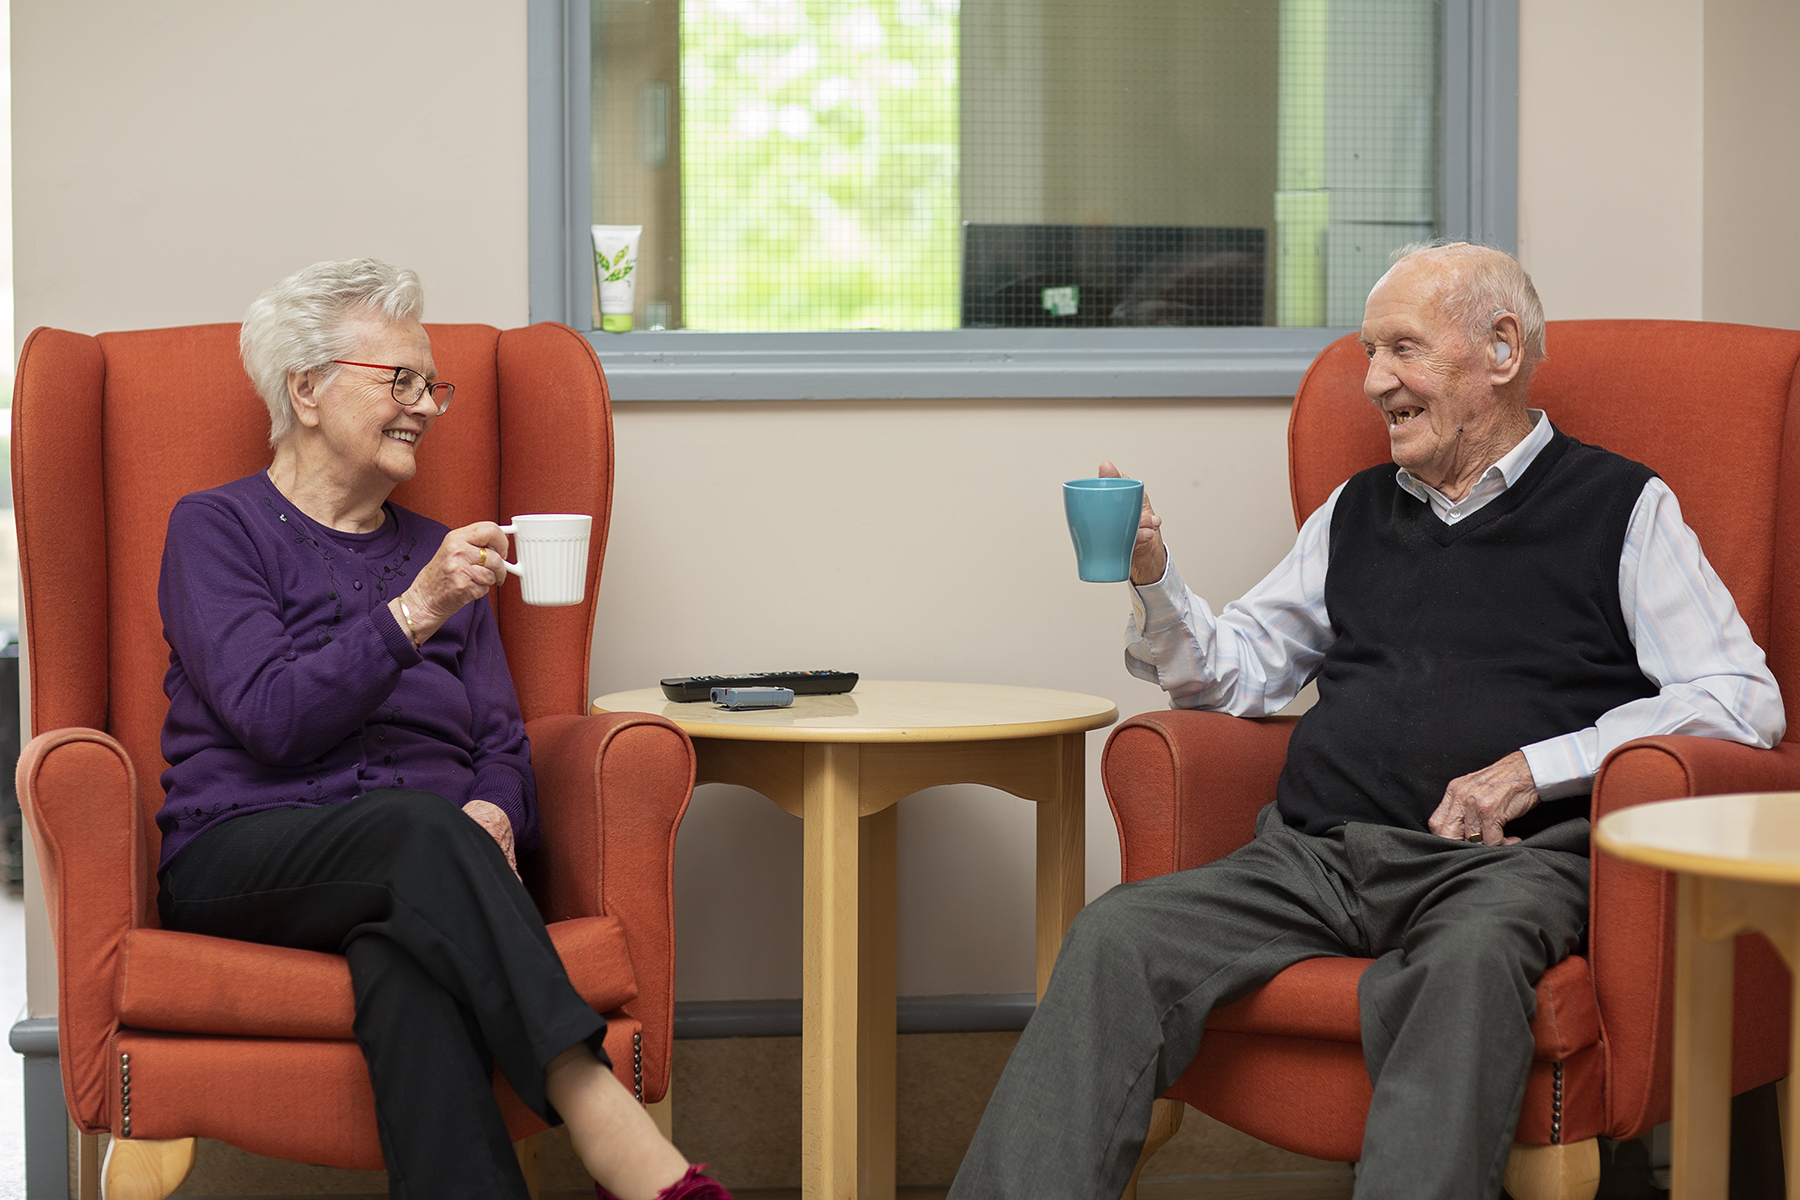 Residents having a cup of tea together at Cwmbran House Care Home